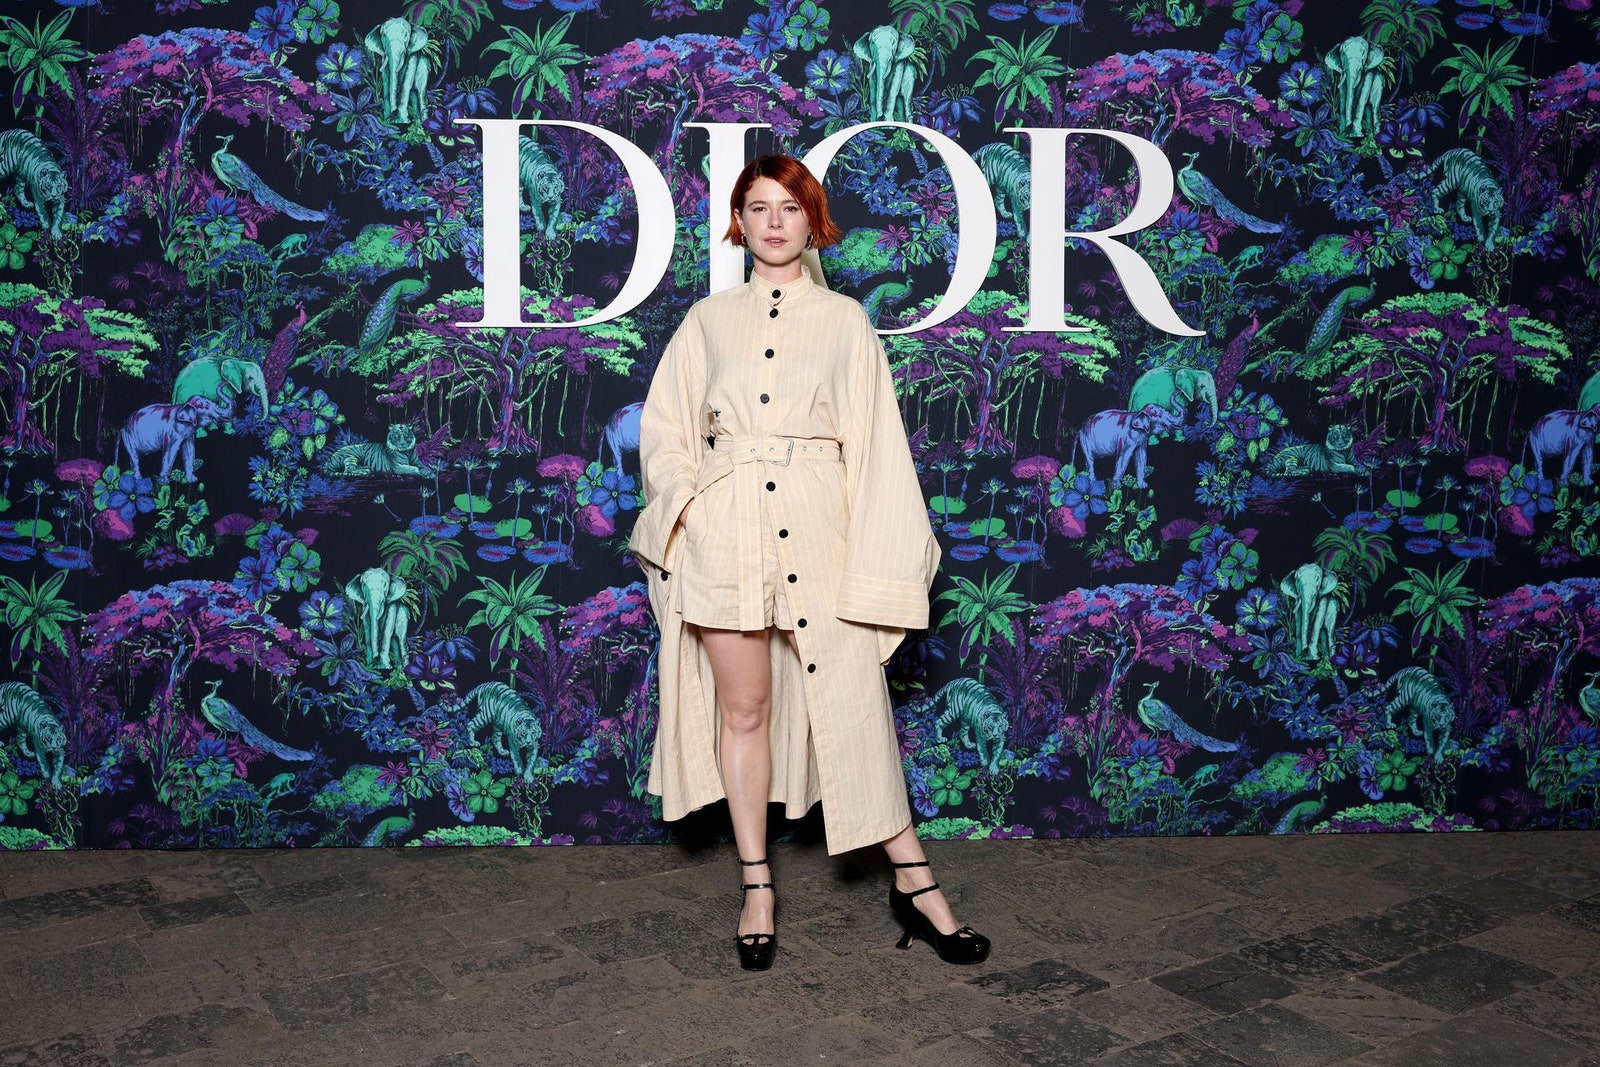 Dior Fall/Winter 2023 Show In Mumbai Jessie Buckley wore a Dior Spring-Summer 2023 beige cotton shirt and shorts.